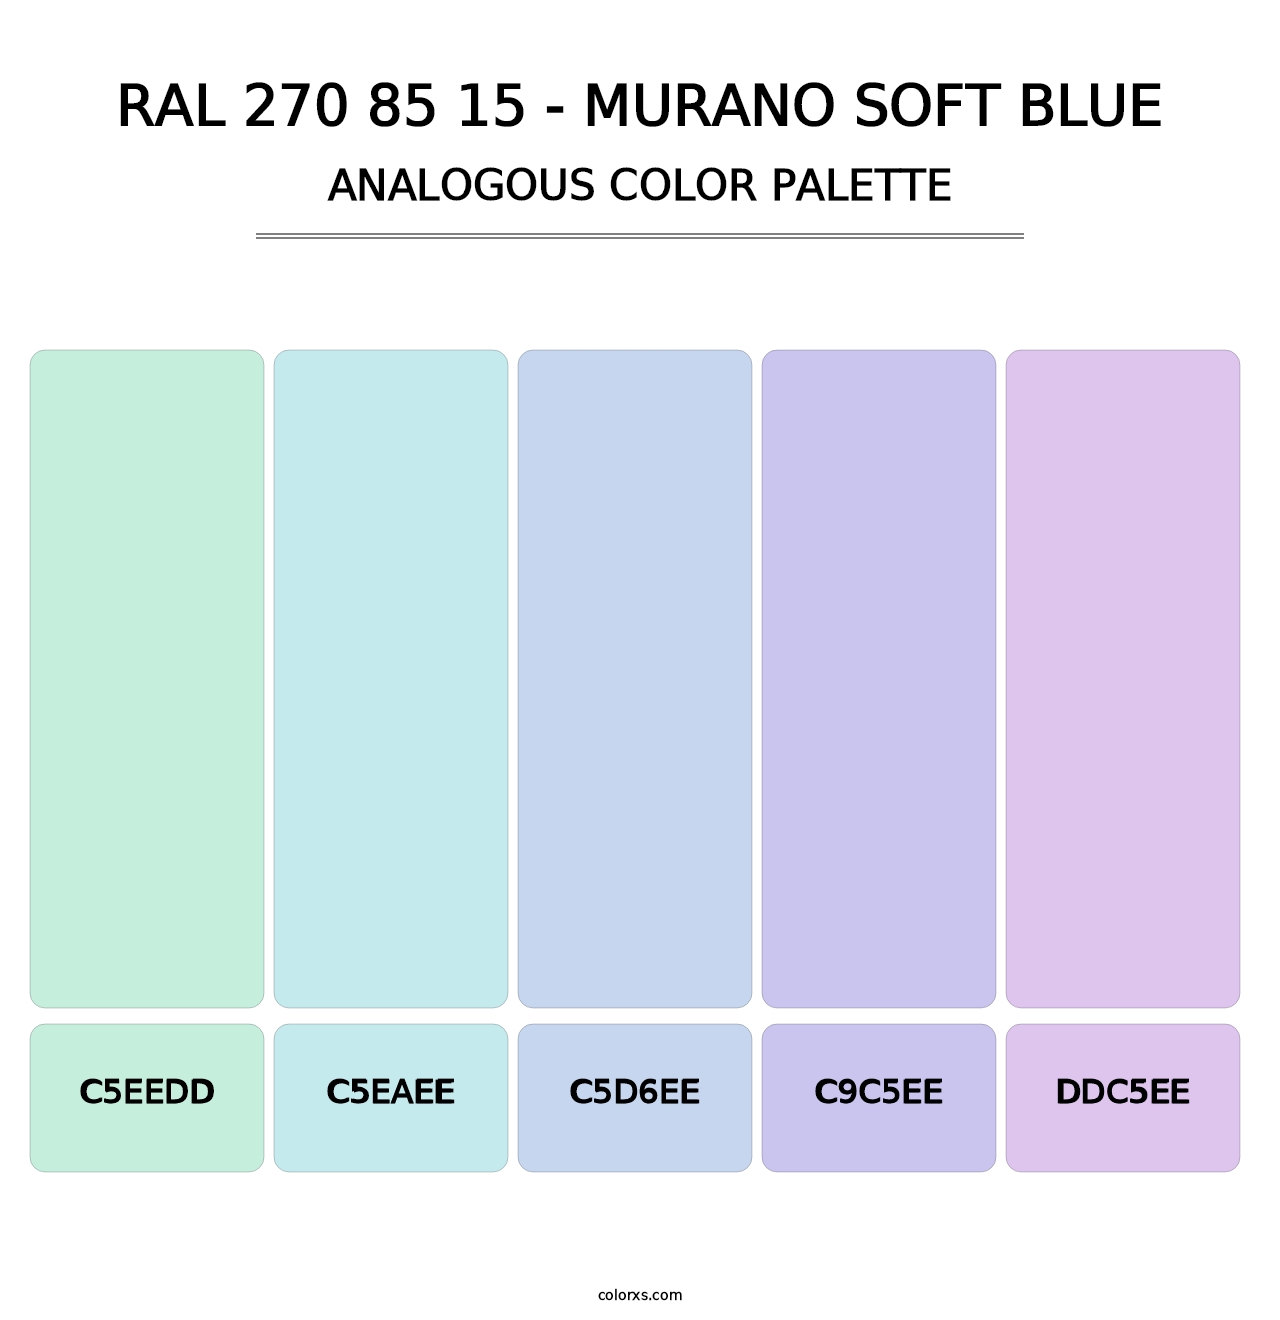 RAL 270 85 15 - Murano Soft Blue - Analogous Color Palette